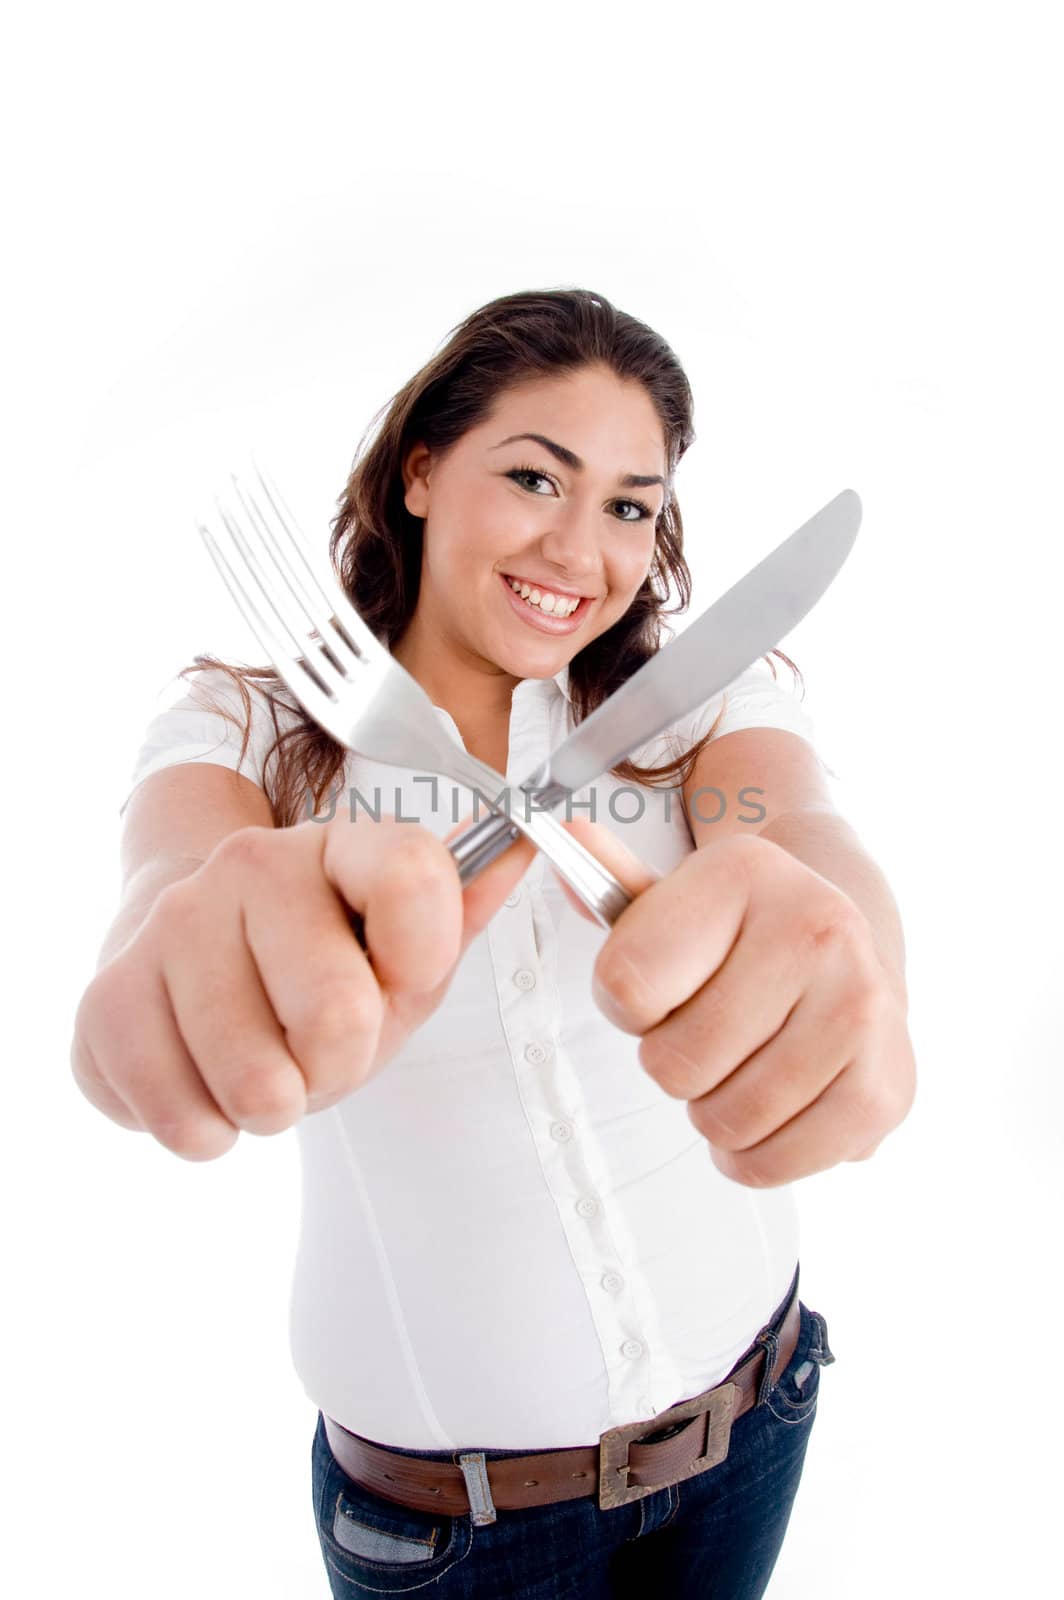 young model holding fork and knife on an isolated white background